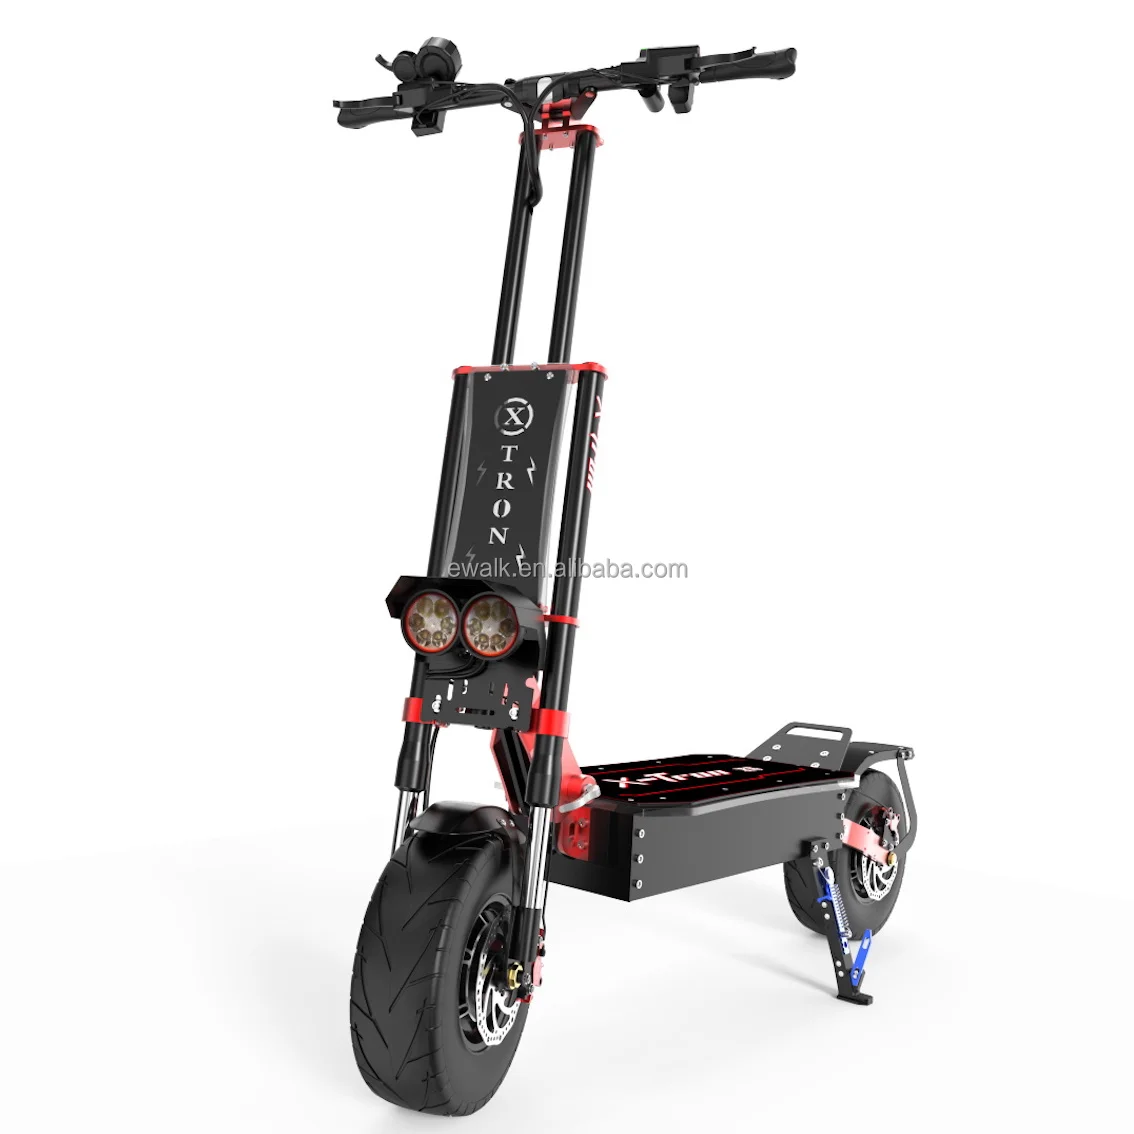 

X-Tron X5 60v Electric Dual Motor Scooter 13inch Fat Tire Scooters 5600w Electric Scooter 60V